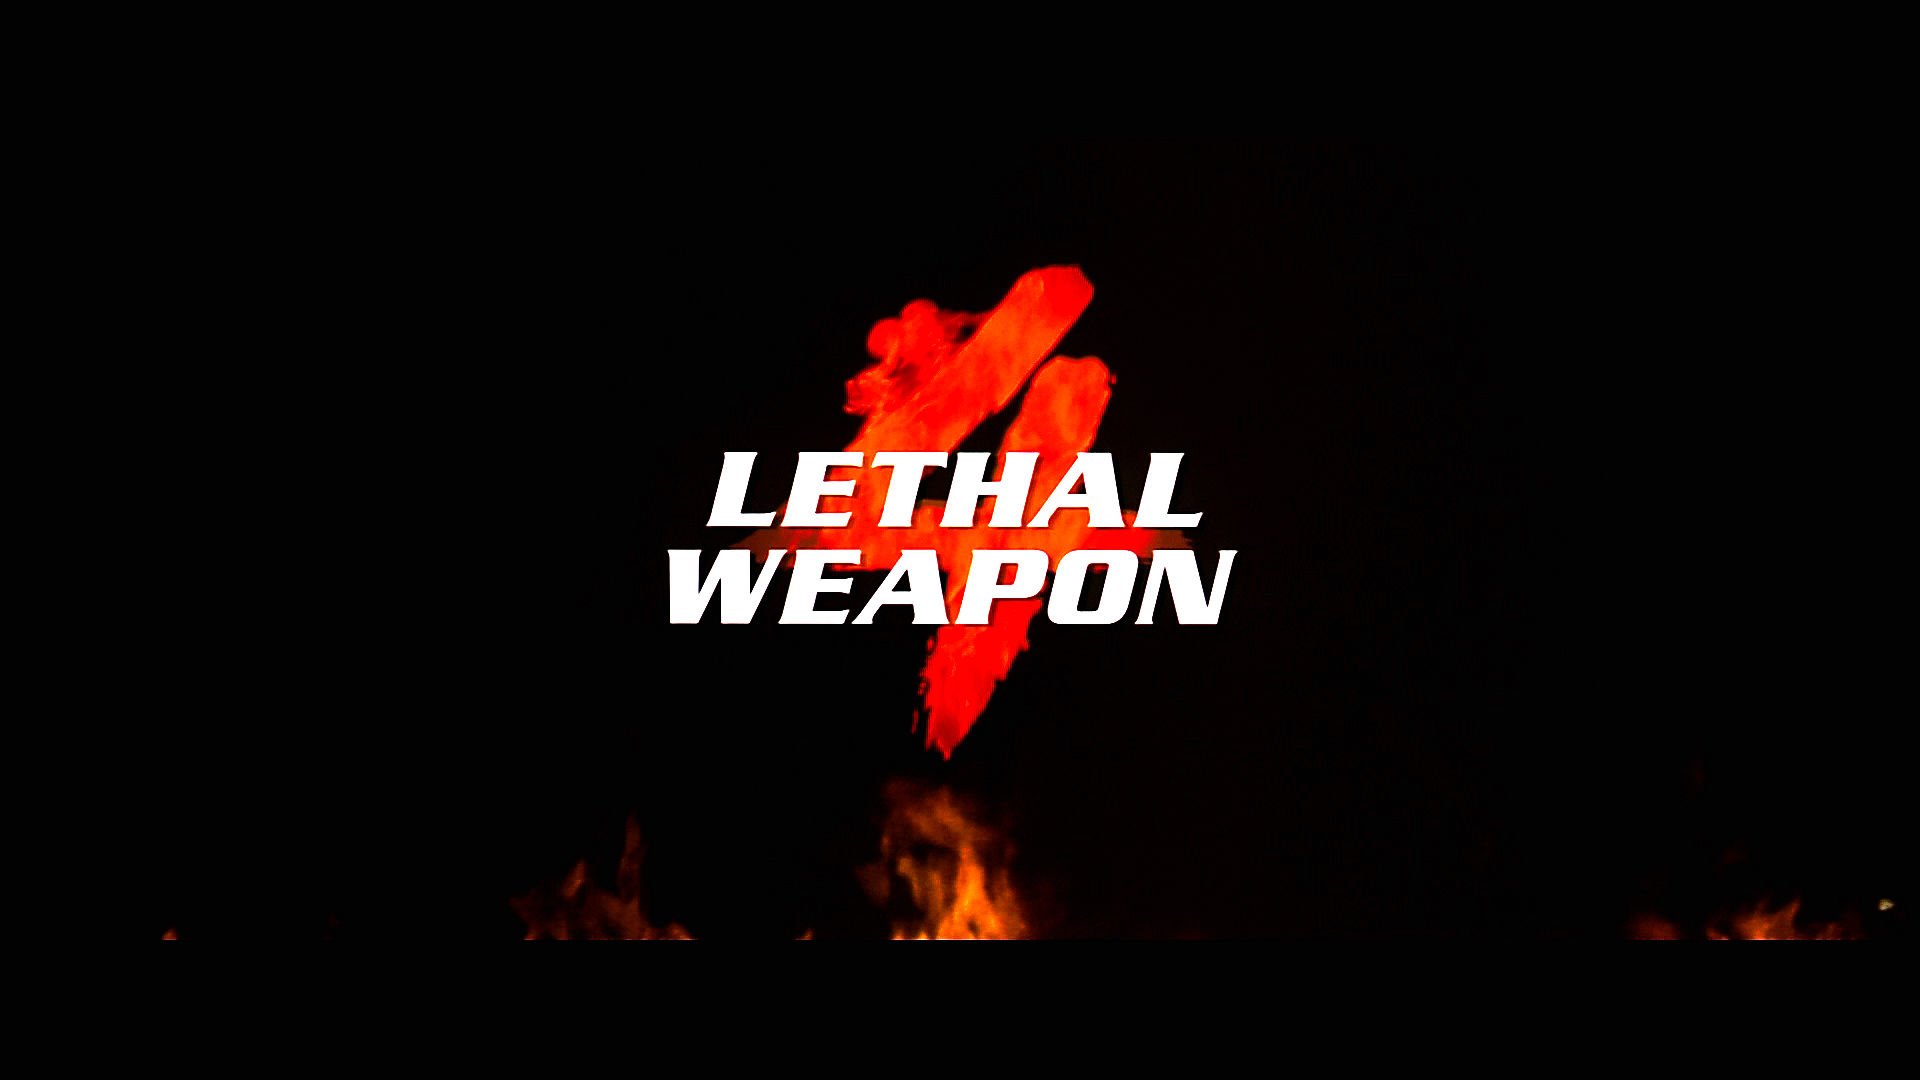 Lethal Weapon Action Thriller Crime Edy Wallpaper Background